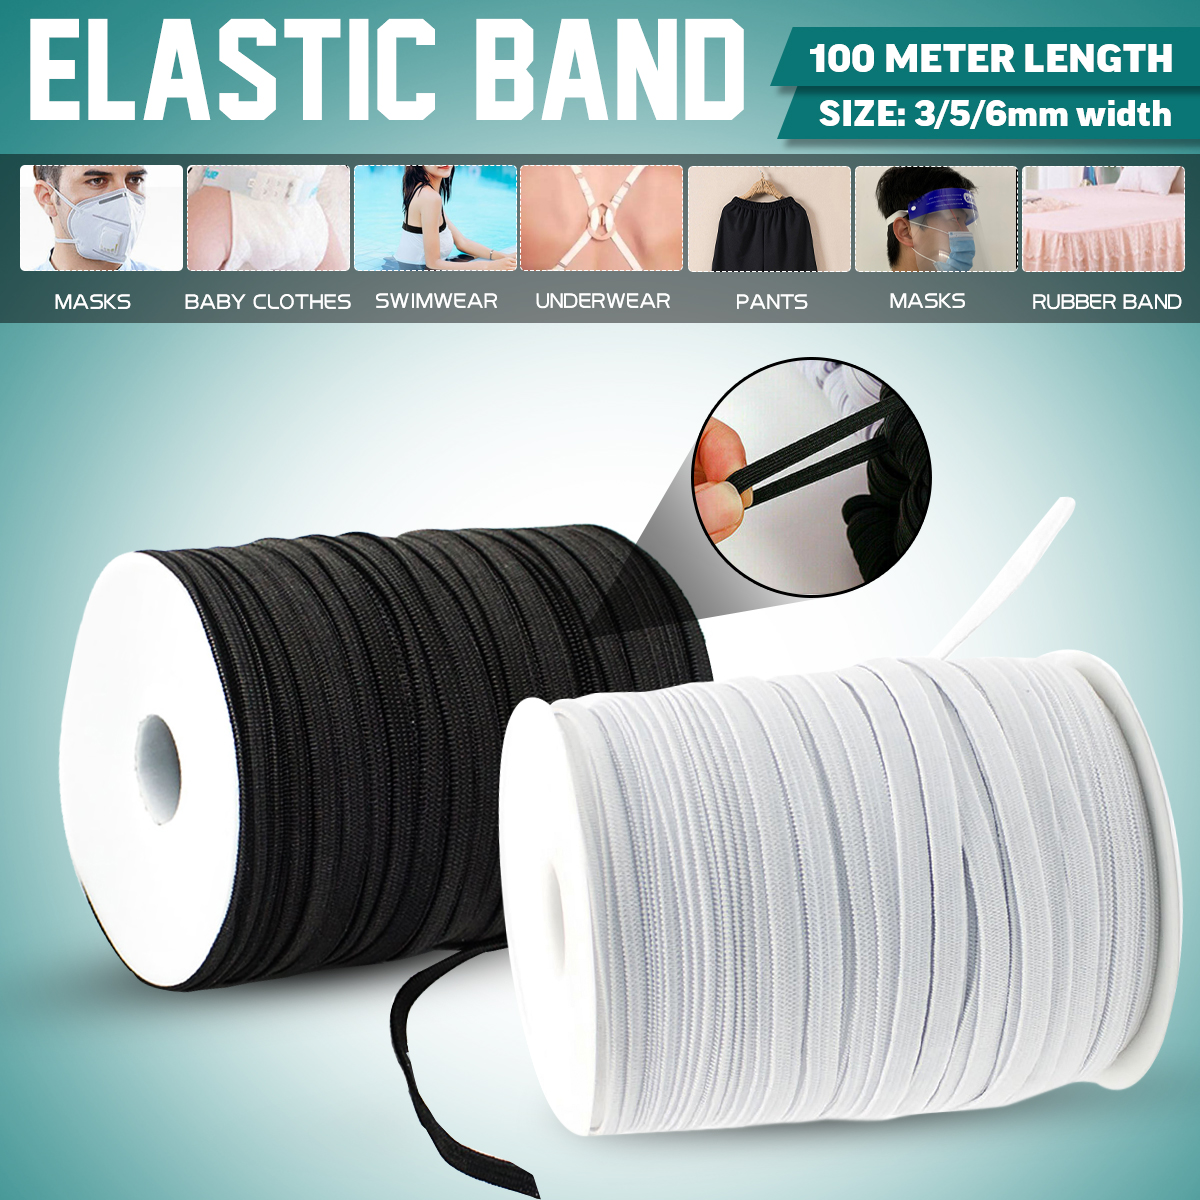 356mm-Elastic-Band-Cord-Knits-100-Meter-Length-Mouth-Hat-Stretch-DIY-Sewing-1701161-2